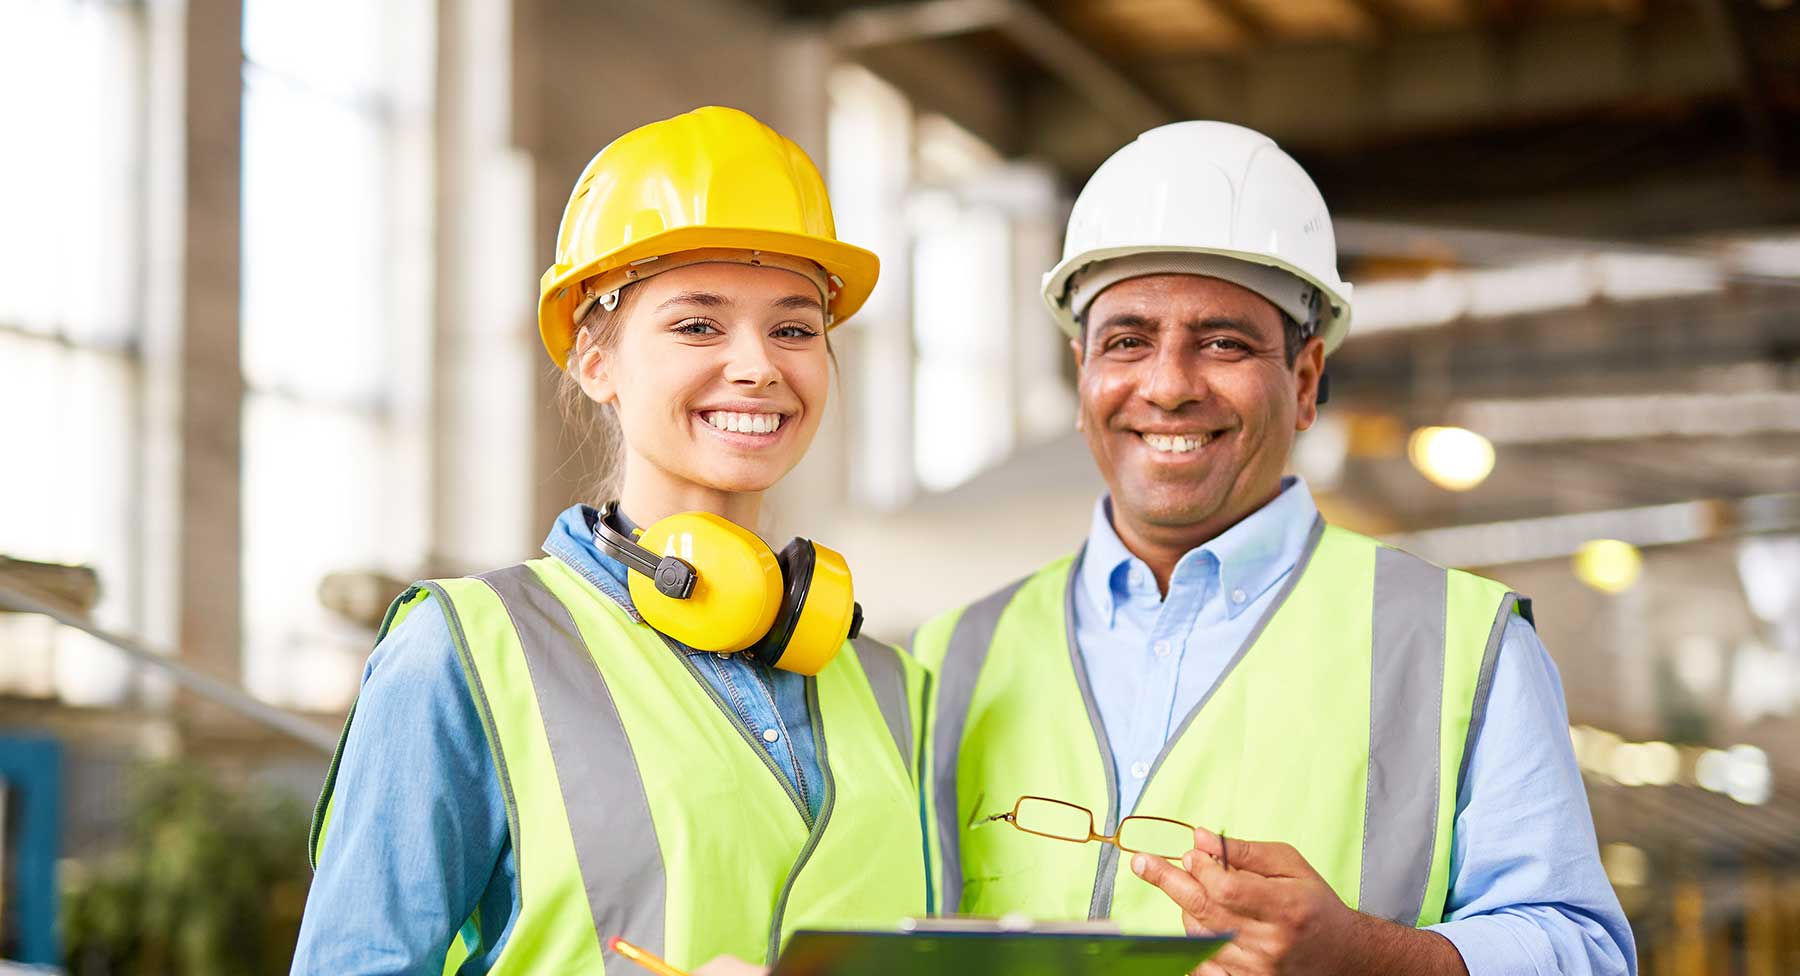 man and woman smiling while wearing safety gear